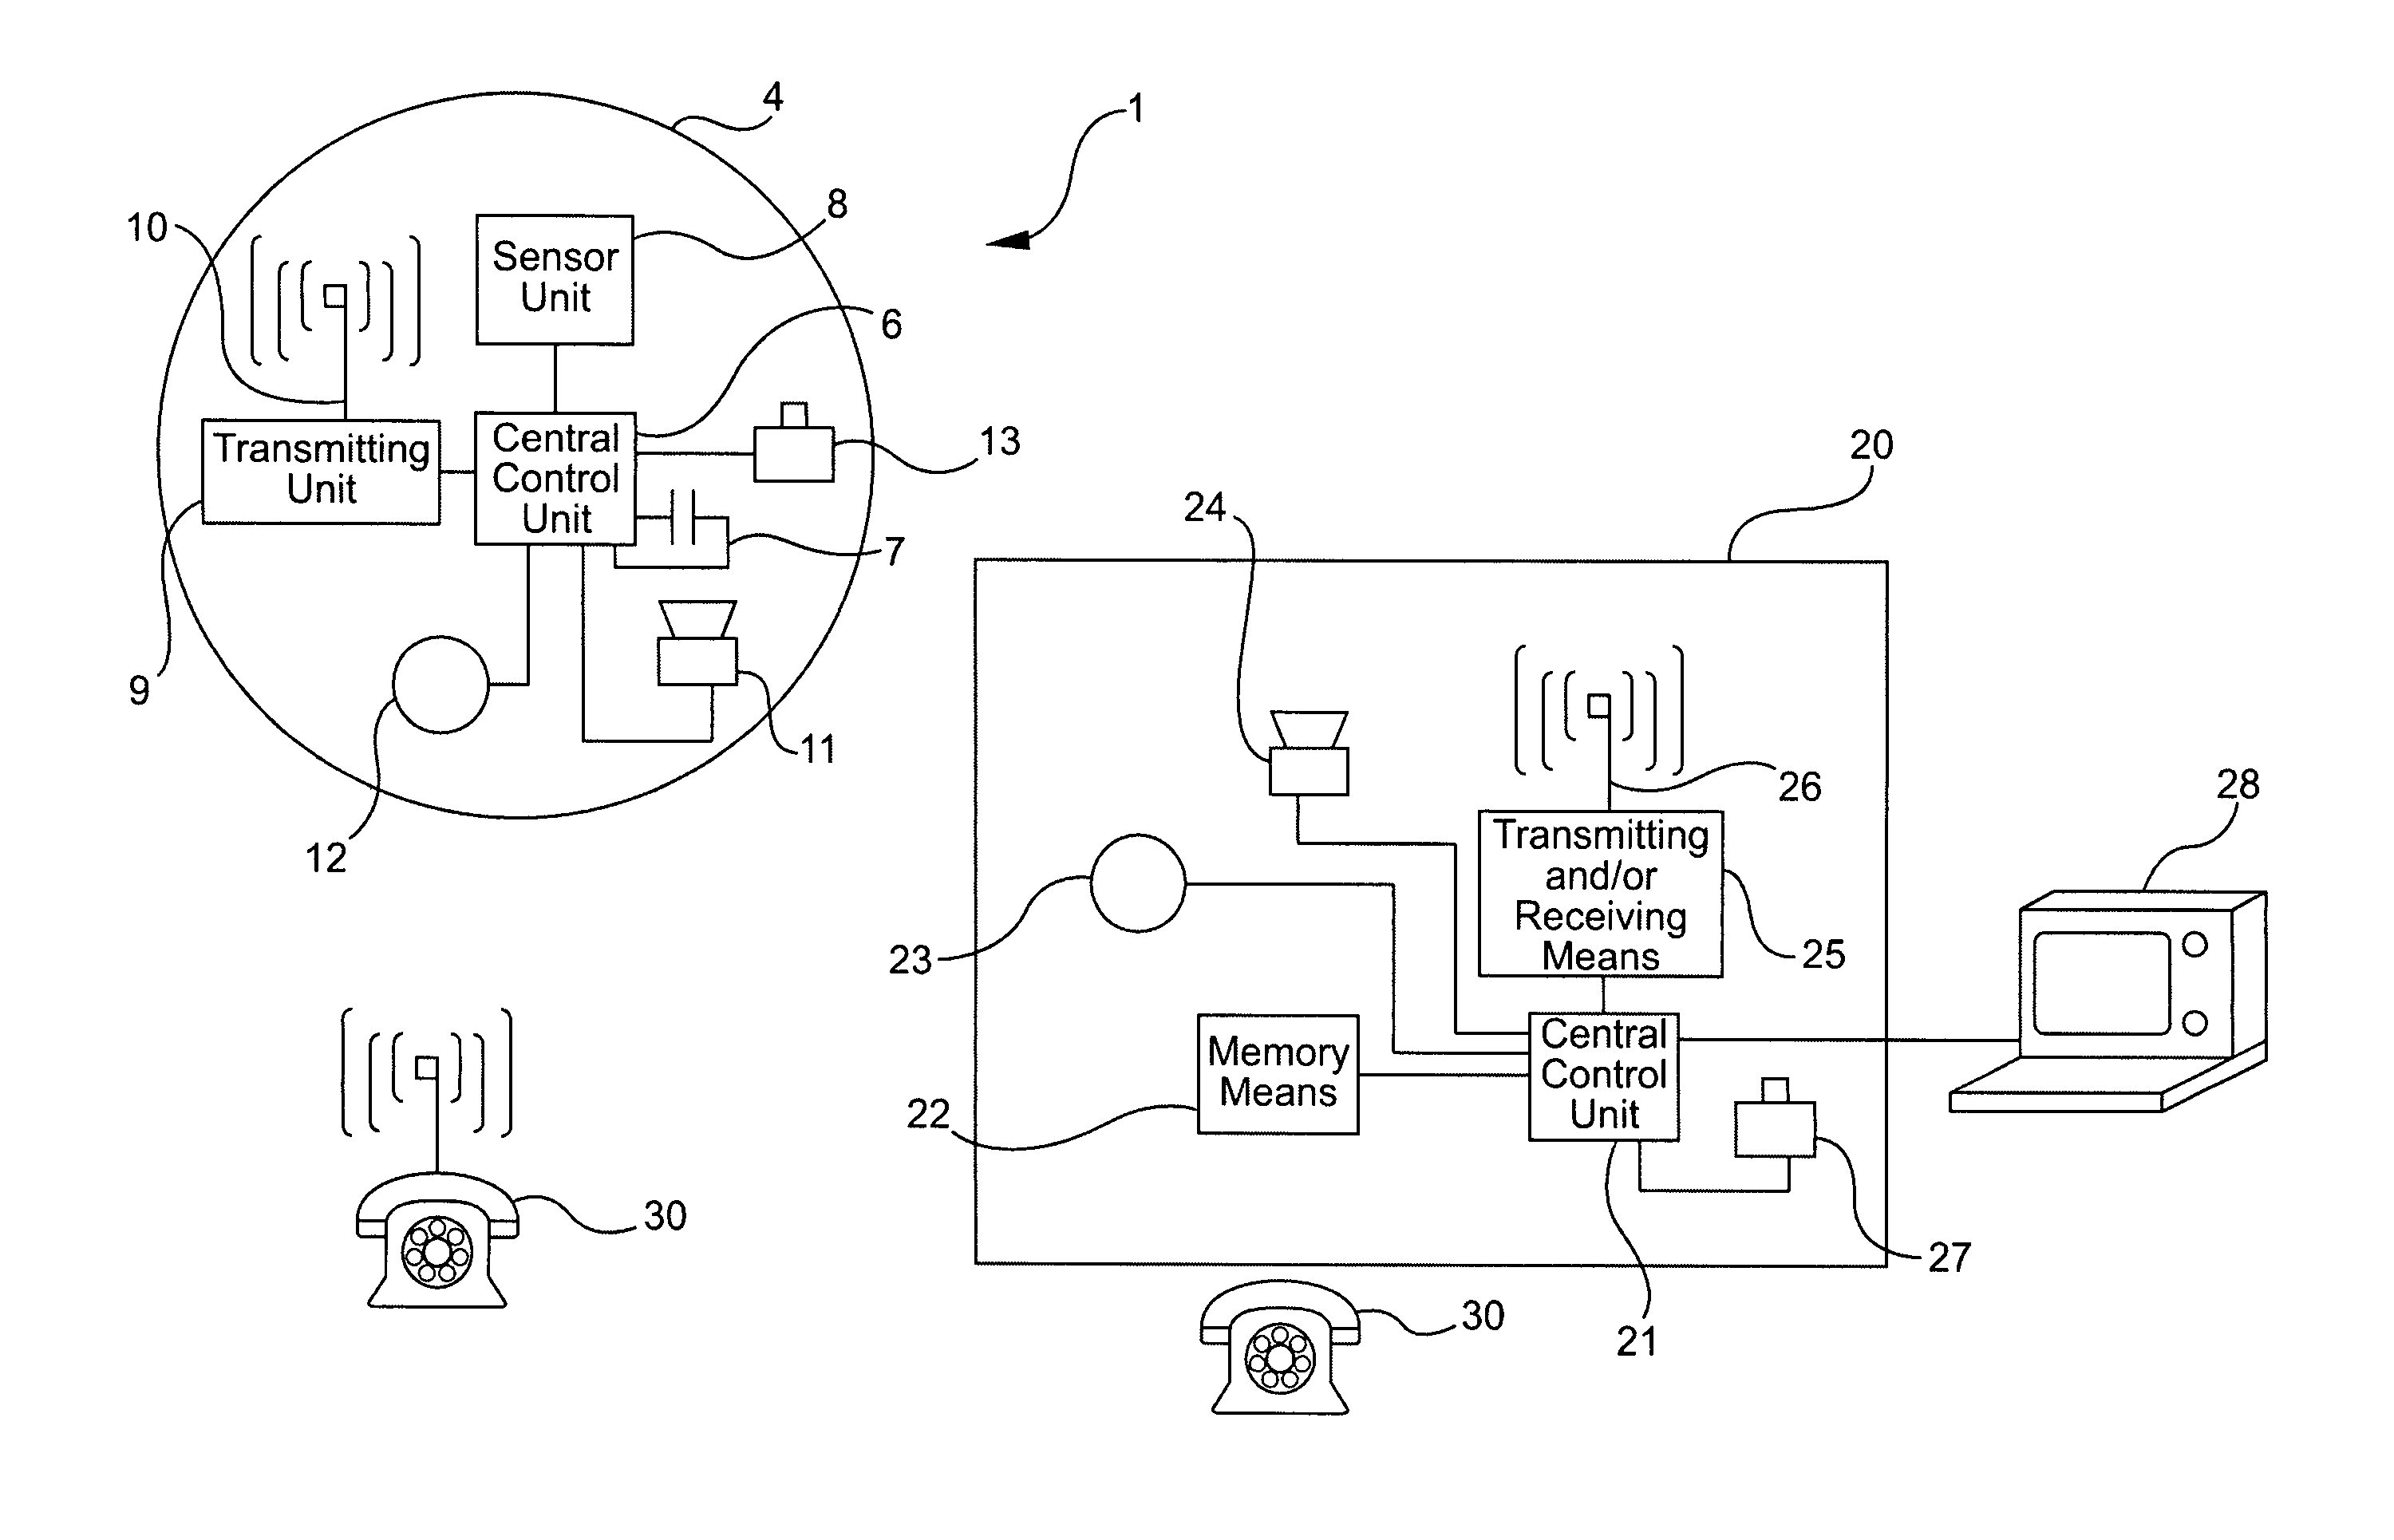 Method and apparatus for registering movement patterns of human beings